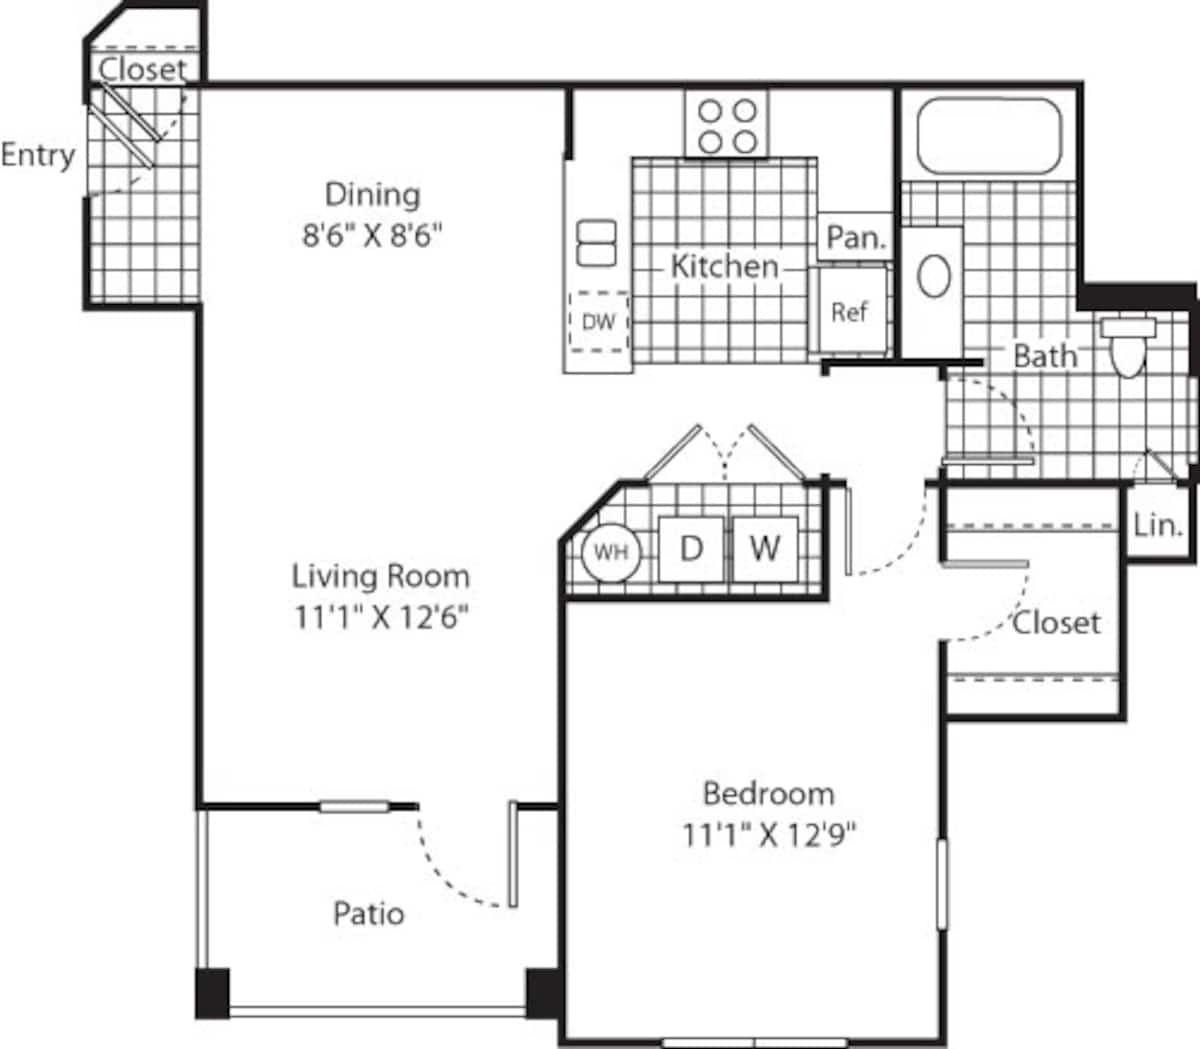 Floorplan diagram for One Bed A-1 - Phase II, showing 1 bedroom